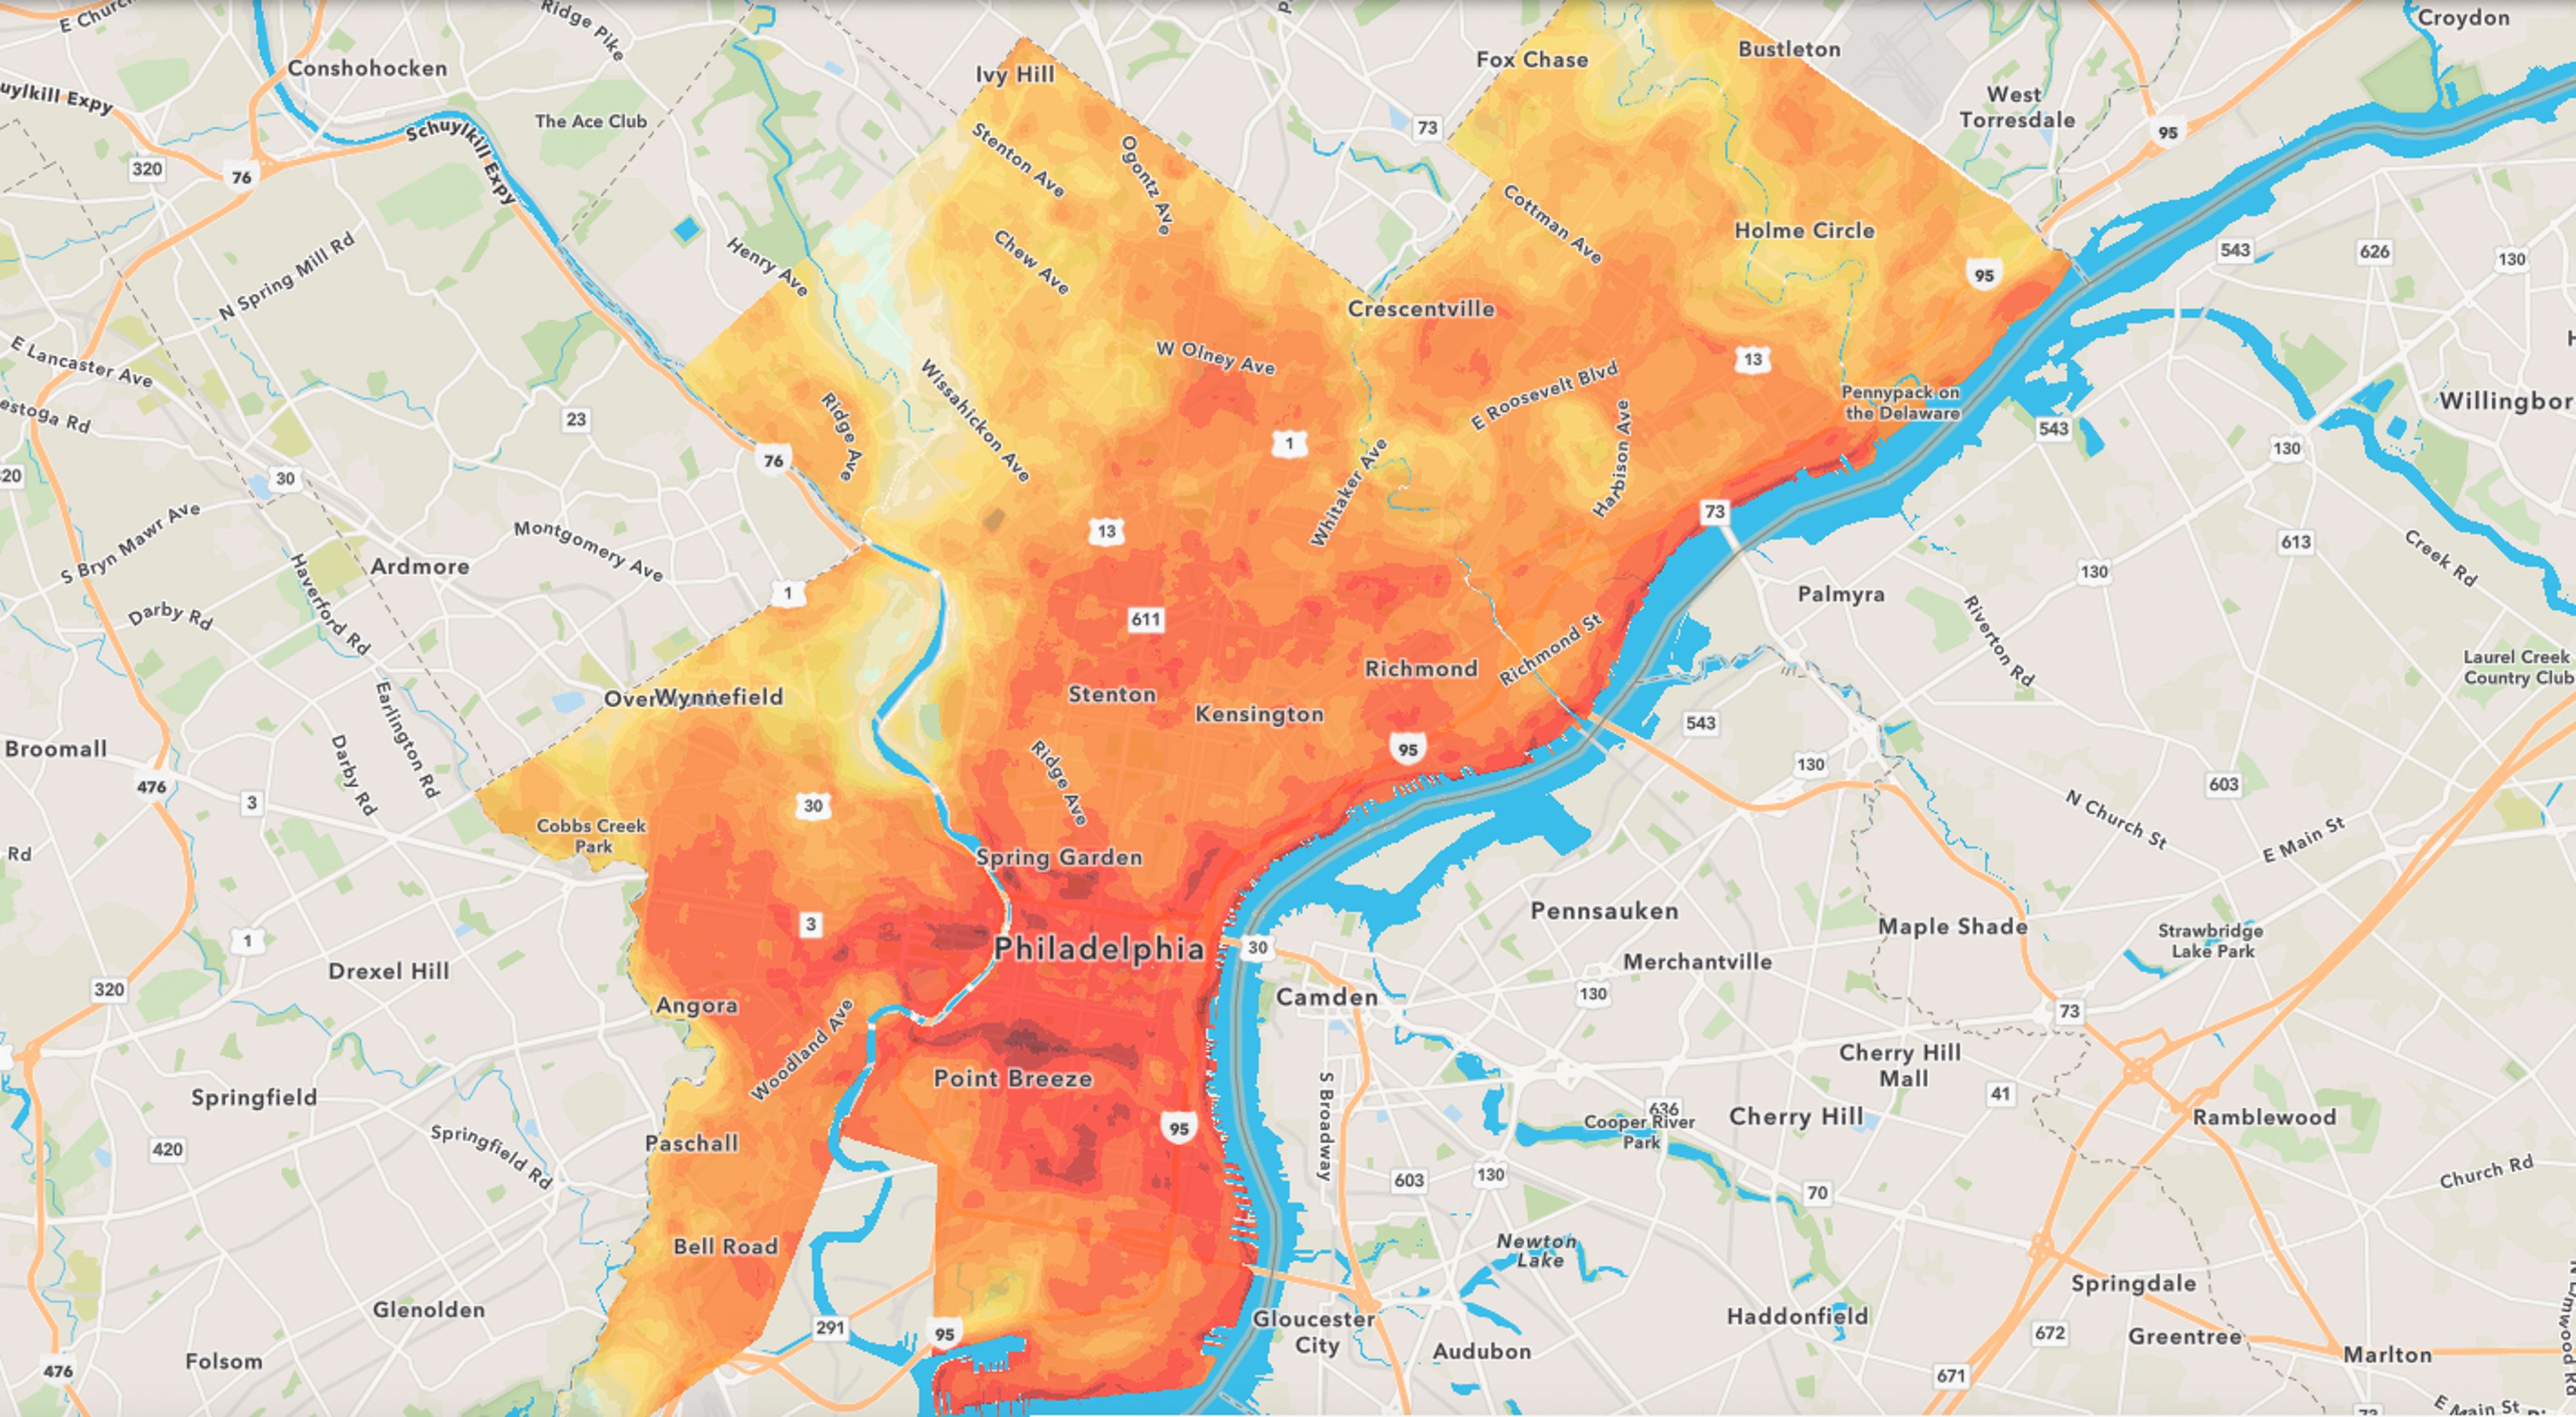 A map of Philadelphia with red and orange overlays.